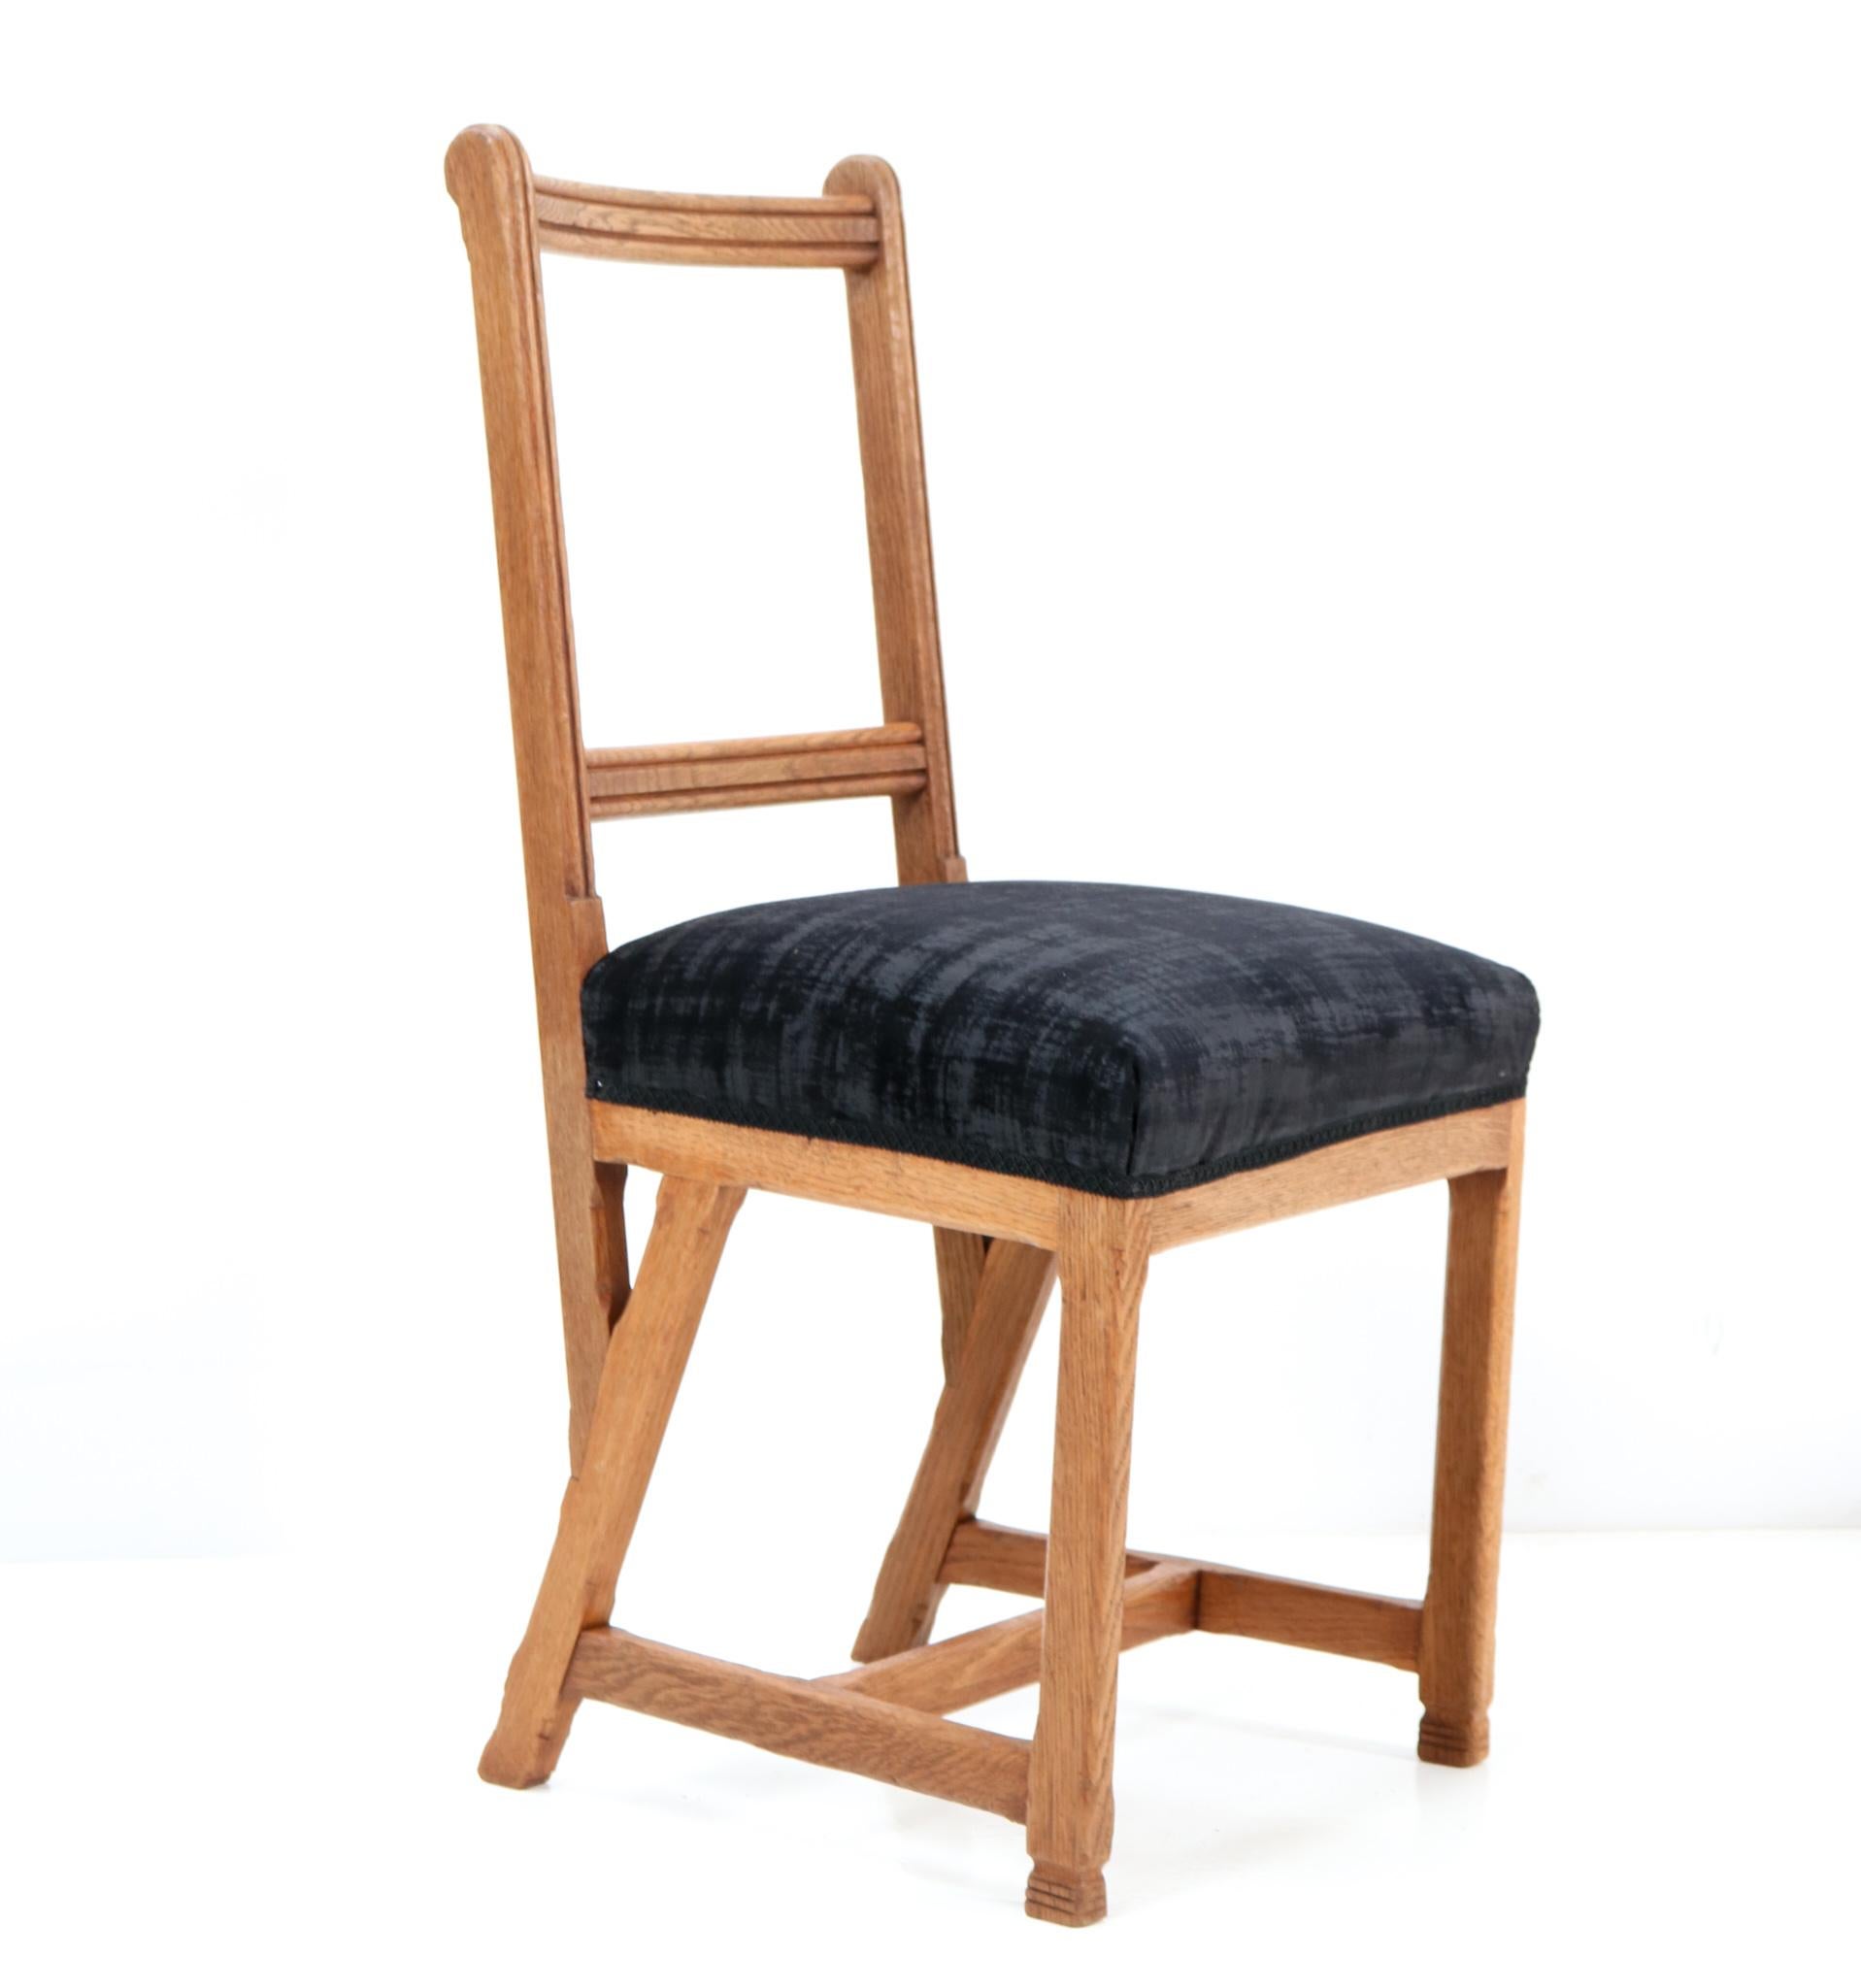 Twelve Oak Arts & Crafts Chairs by Hendrik Petrus for the University of Leiden For Sale 4